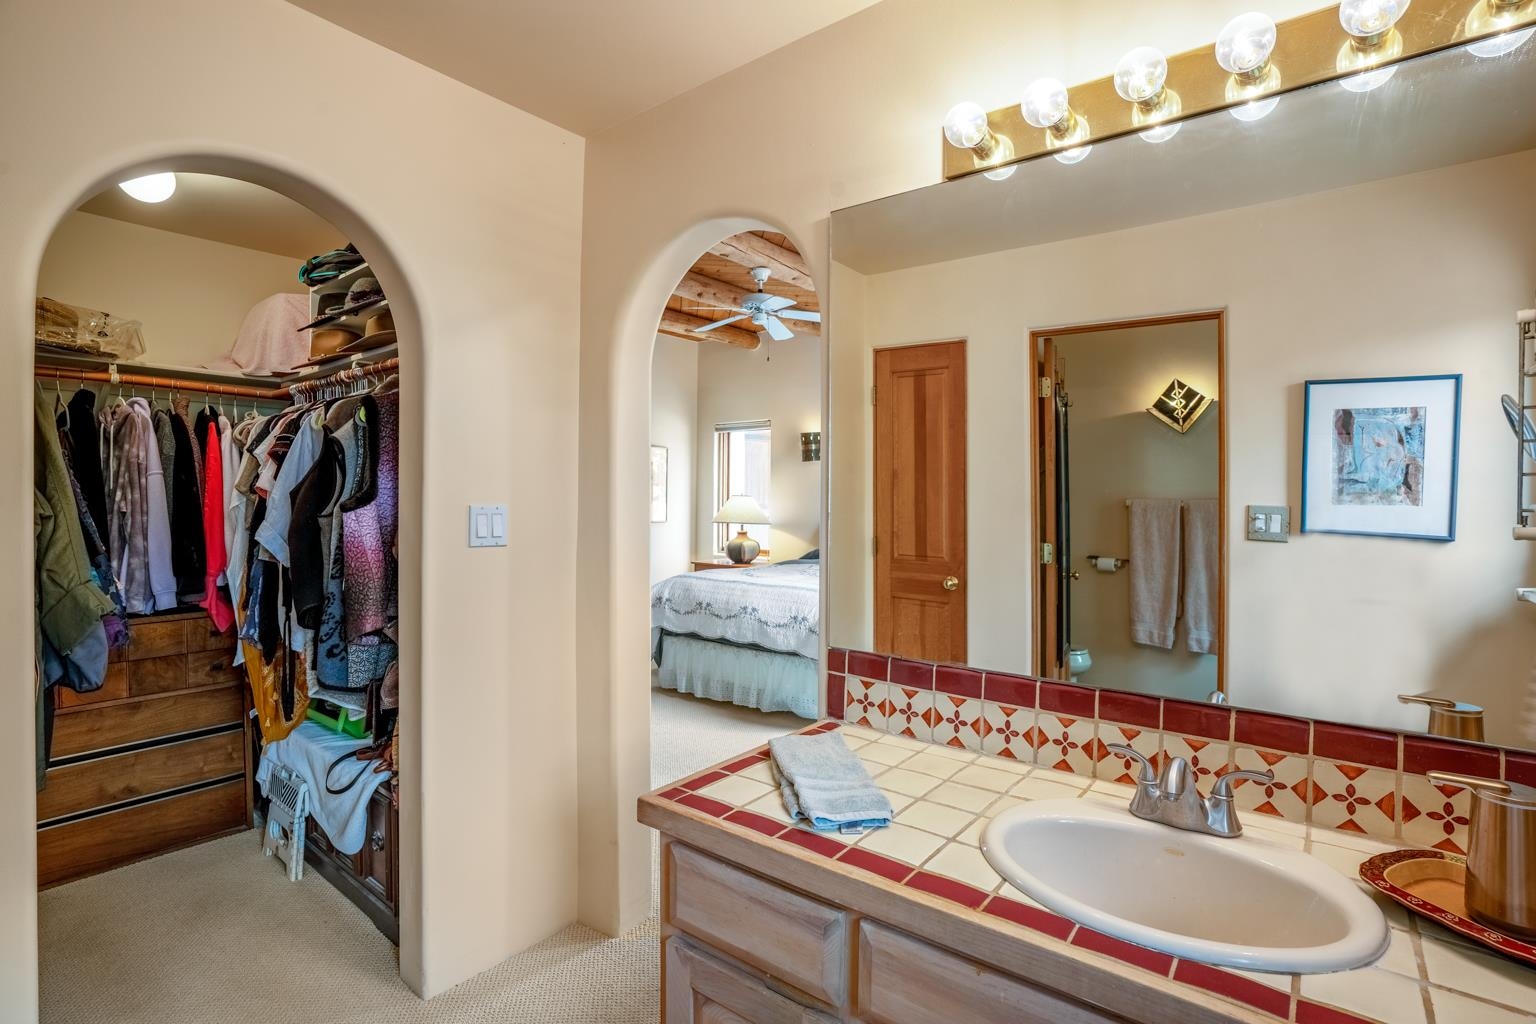 15 Dulce, Santa Fe, New Mexico 87508, 3 Bedrooms Bedrooms, ,2 BathroomsBathrooms,Residential,For Sale,15 Dulce,202201924